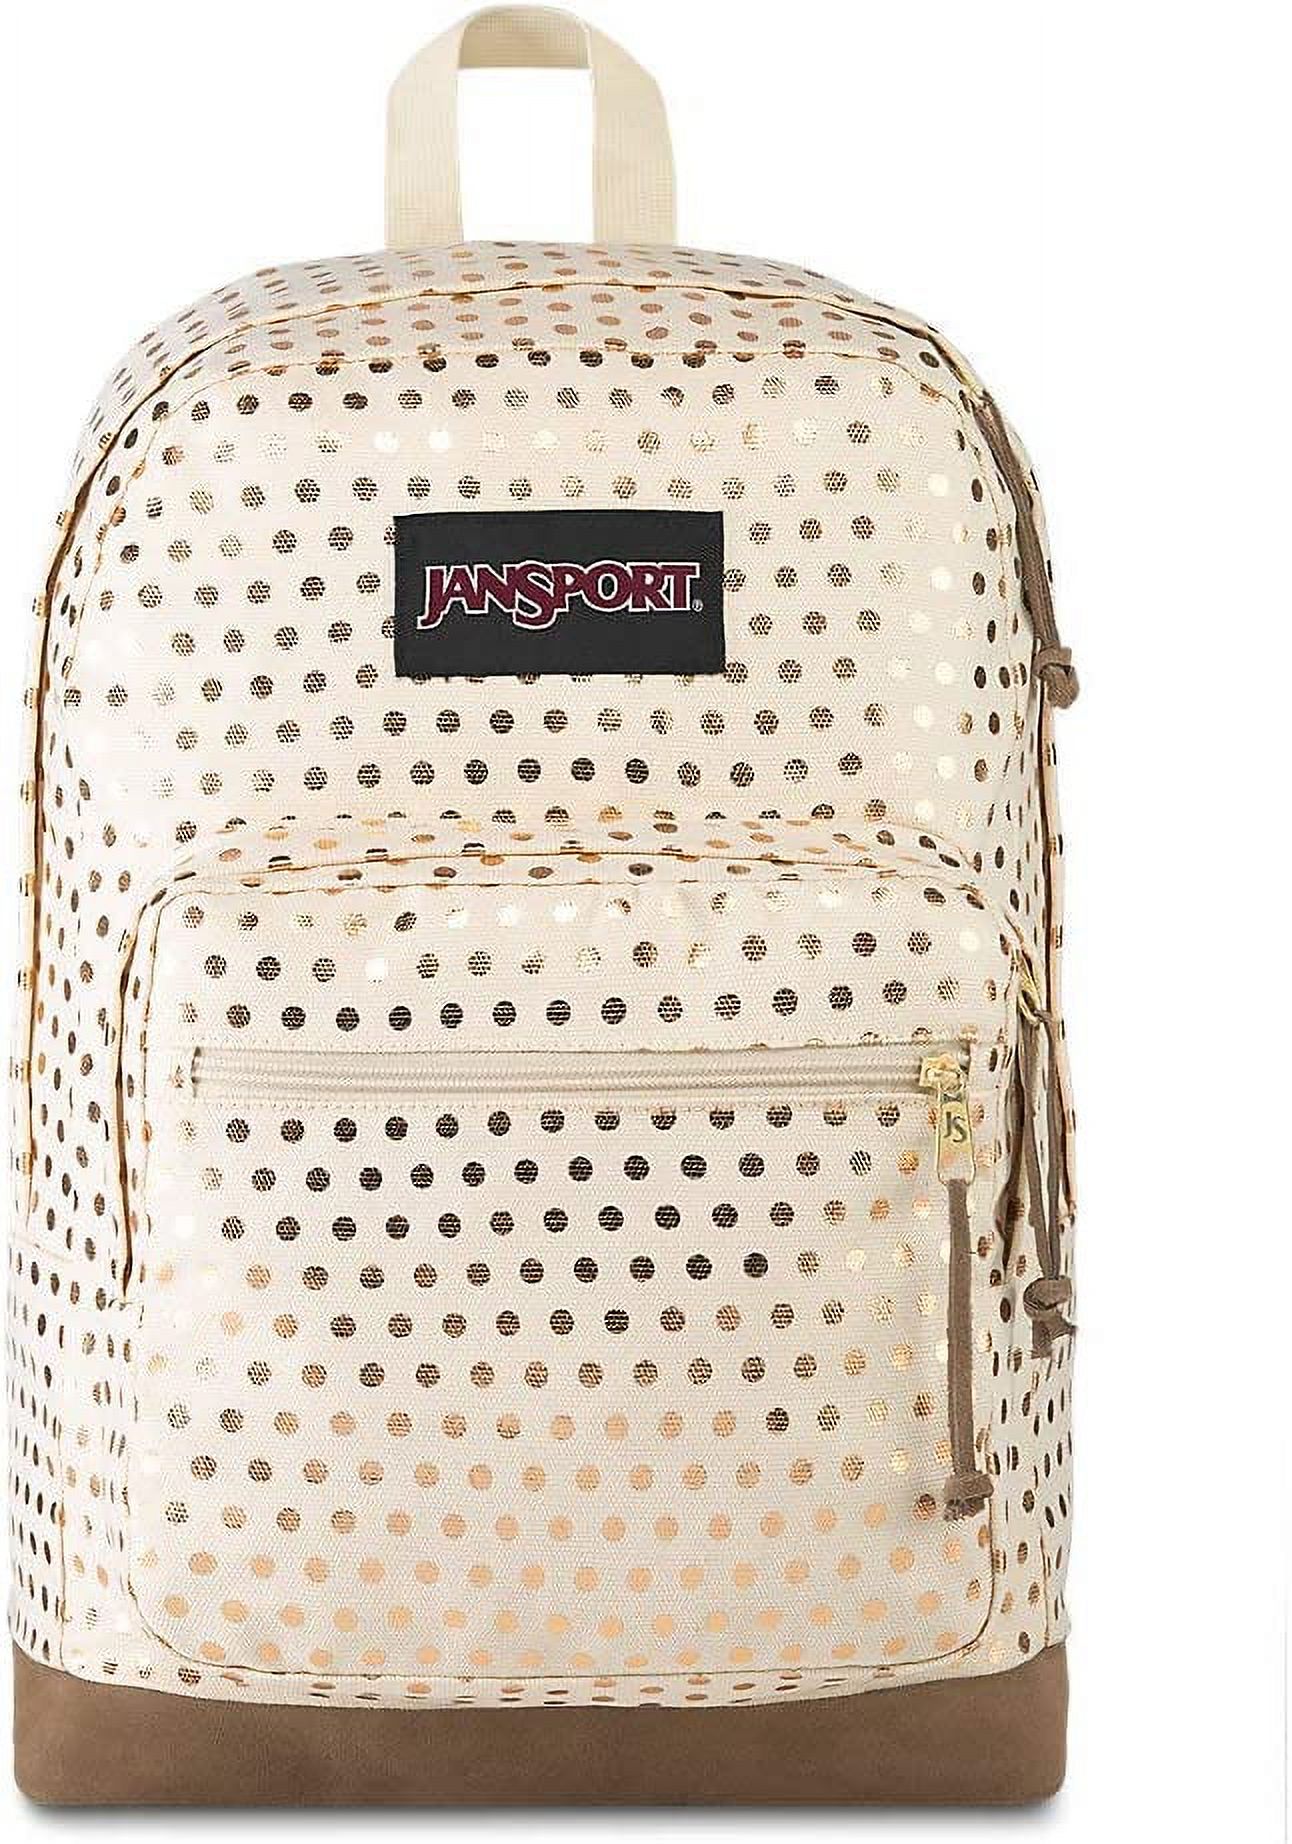 JanSport Right Pack Expressions Backpack - image 1 of 3